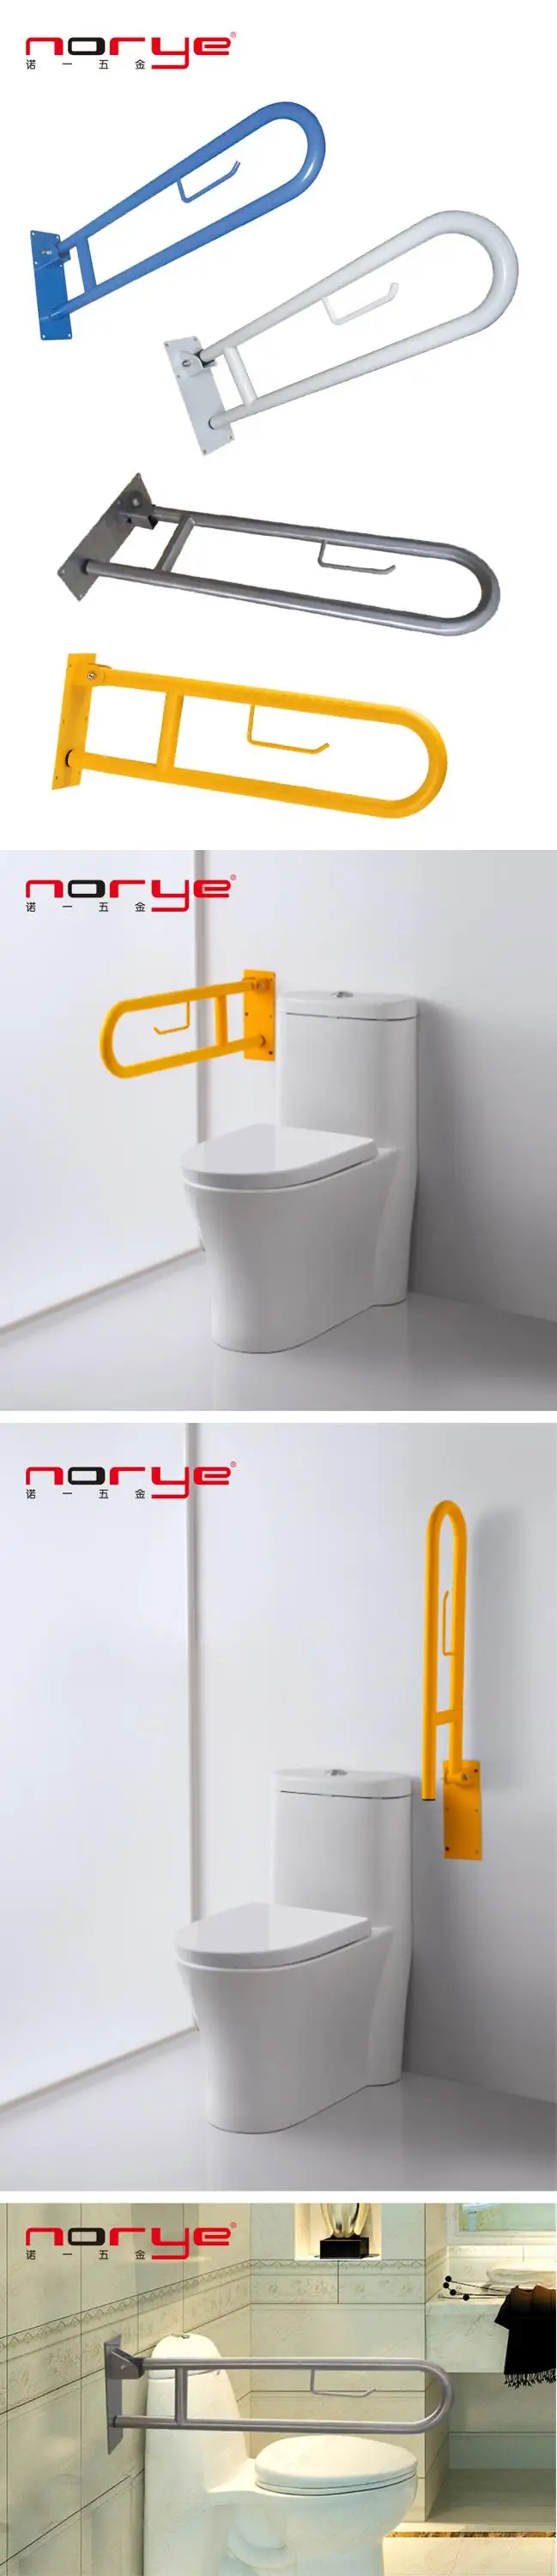 sample available high quality swing up grab bar for bathtub